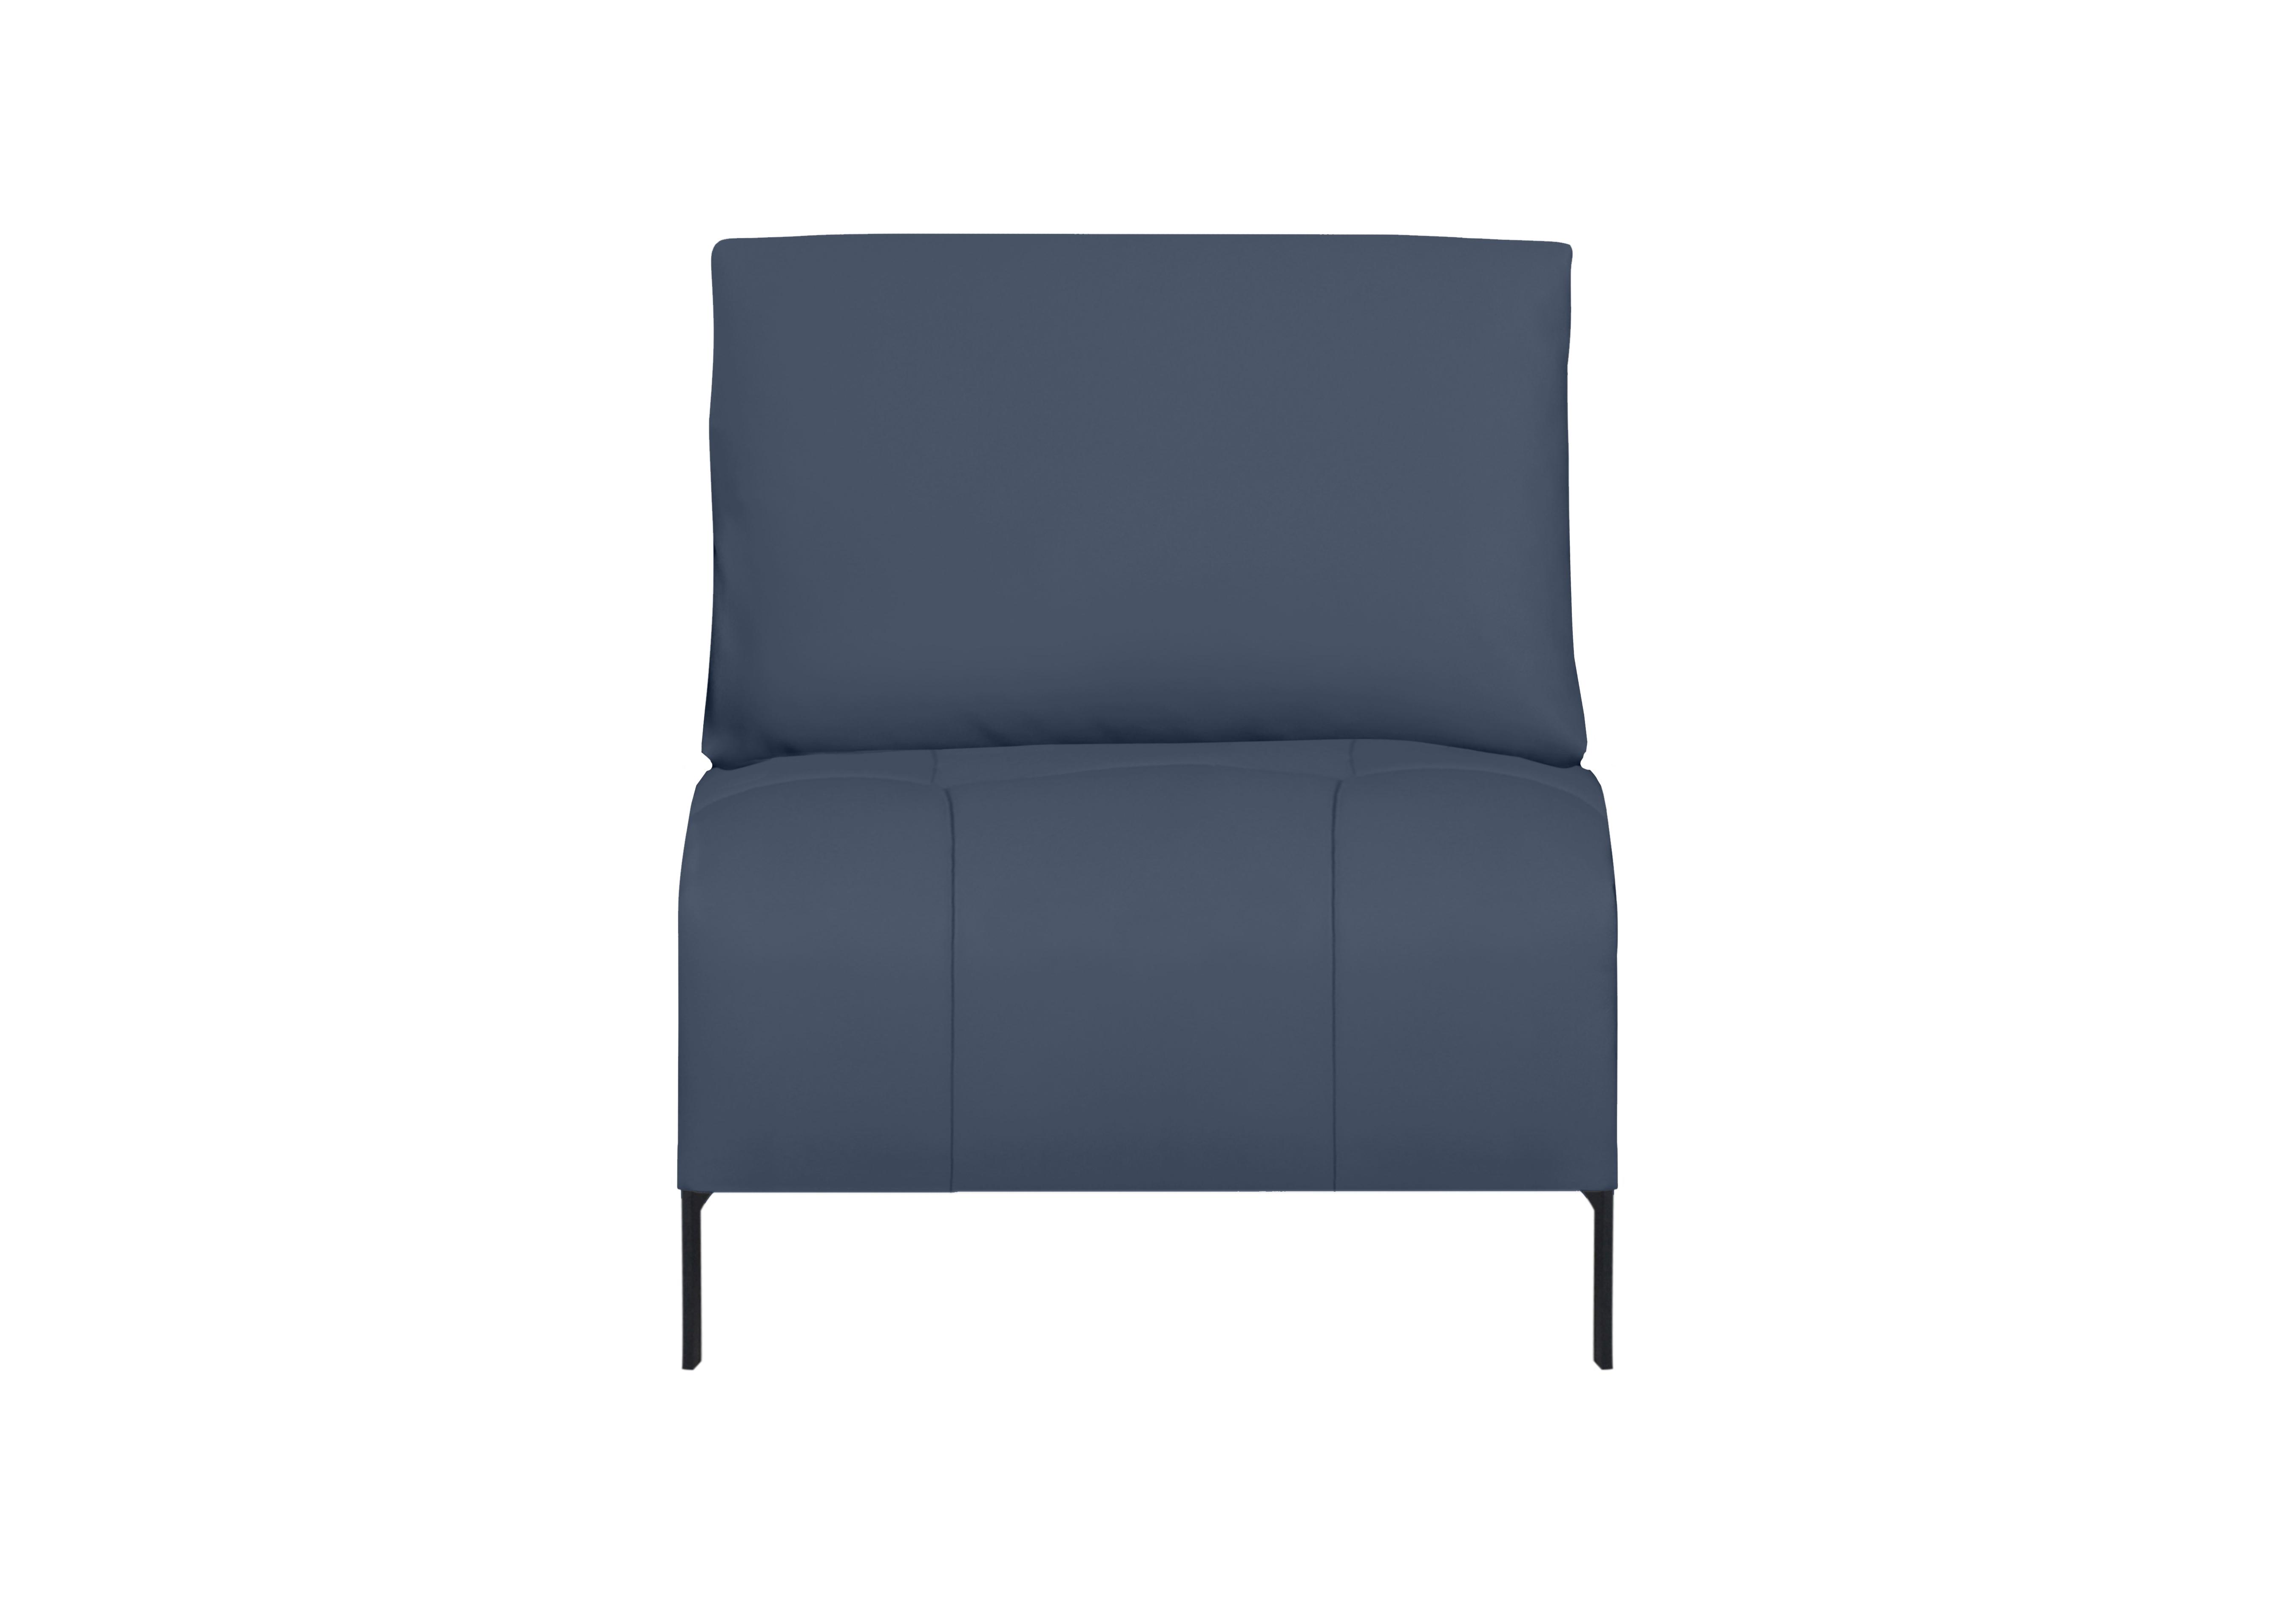 Lawson Leather 1.5 Seater Armless Unit in Np-518e Ocean Blue on Furniture Village